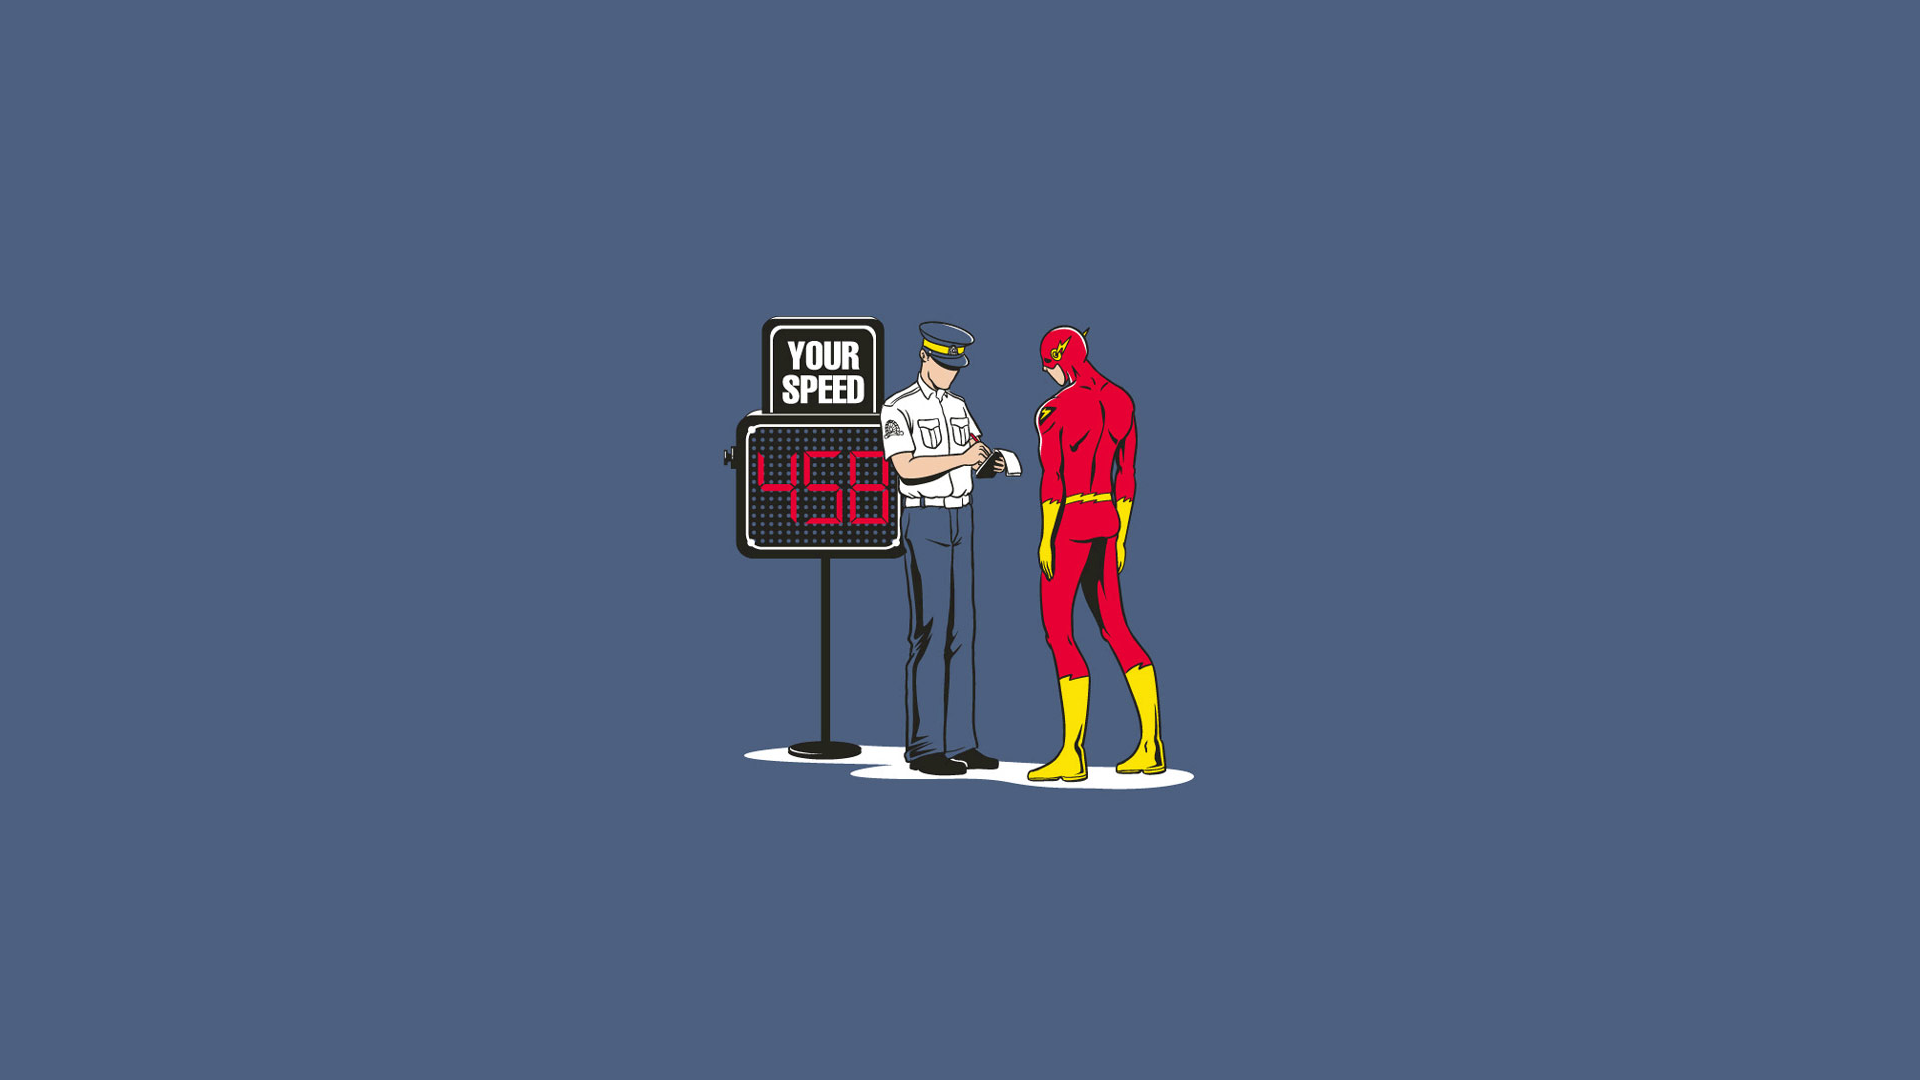 Funny Marvel Pictures Wallpapers